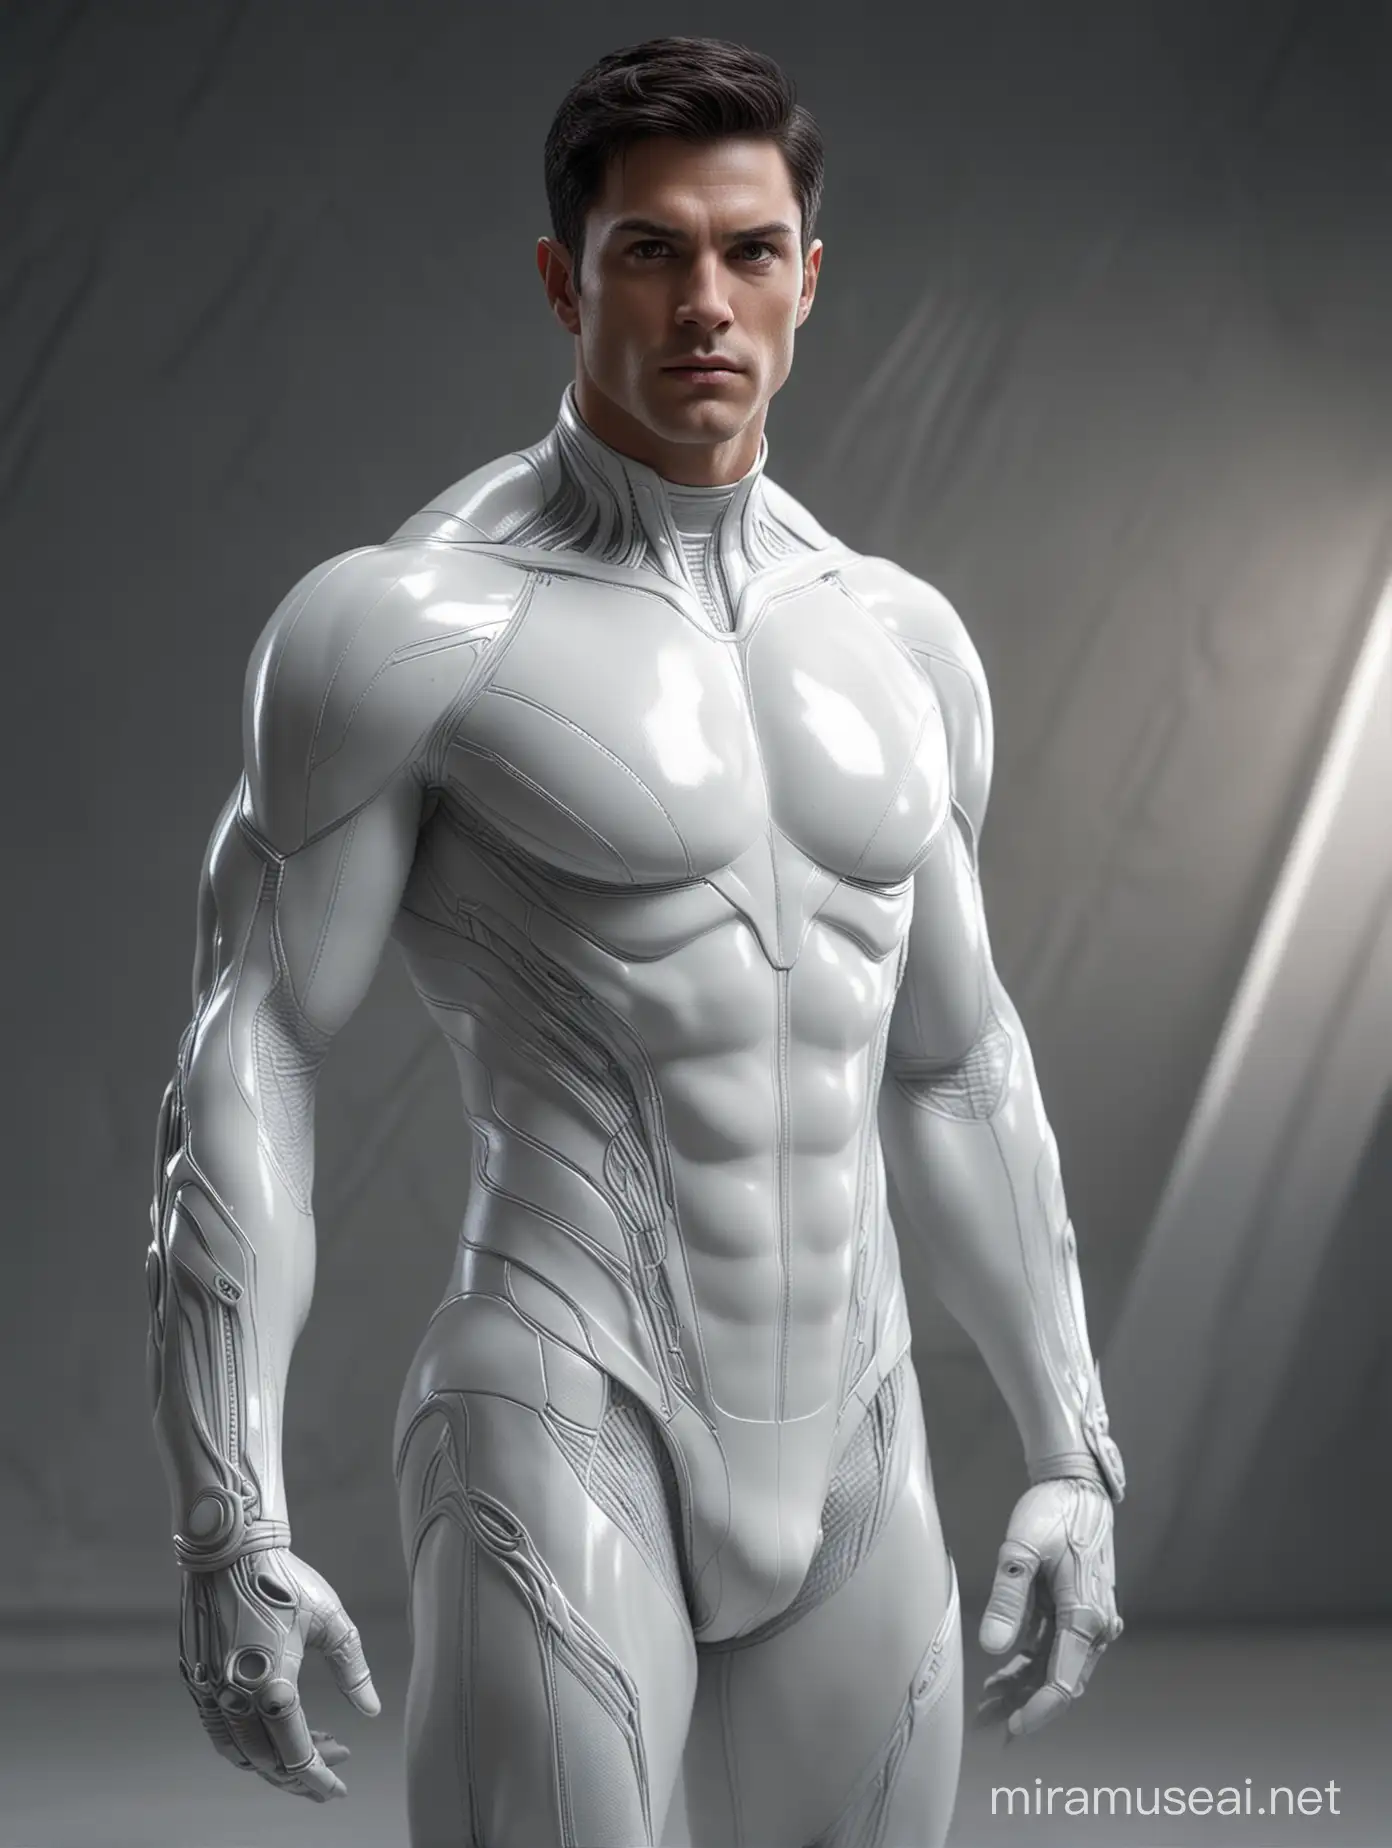 Full full body photorealistic An Alien handsome hunky masculine man from Krypton. Dark hair , Super Athletic body. translucent eyes and prominent cheekbones. Wearing a form-fitting white biomorphic bodysuit. Futuristic Kryptonian background. intricate details, beautifully shot, hyperrealistic, sharp focus, 64 megapixels, perfect composition, high contrast, cinematic, atmospherics cinematic 